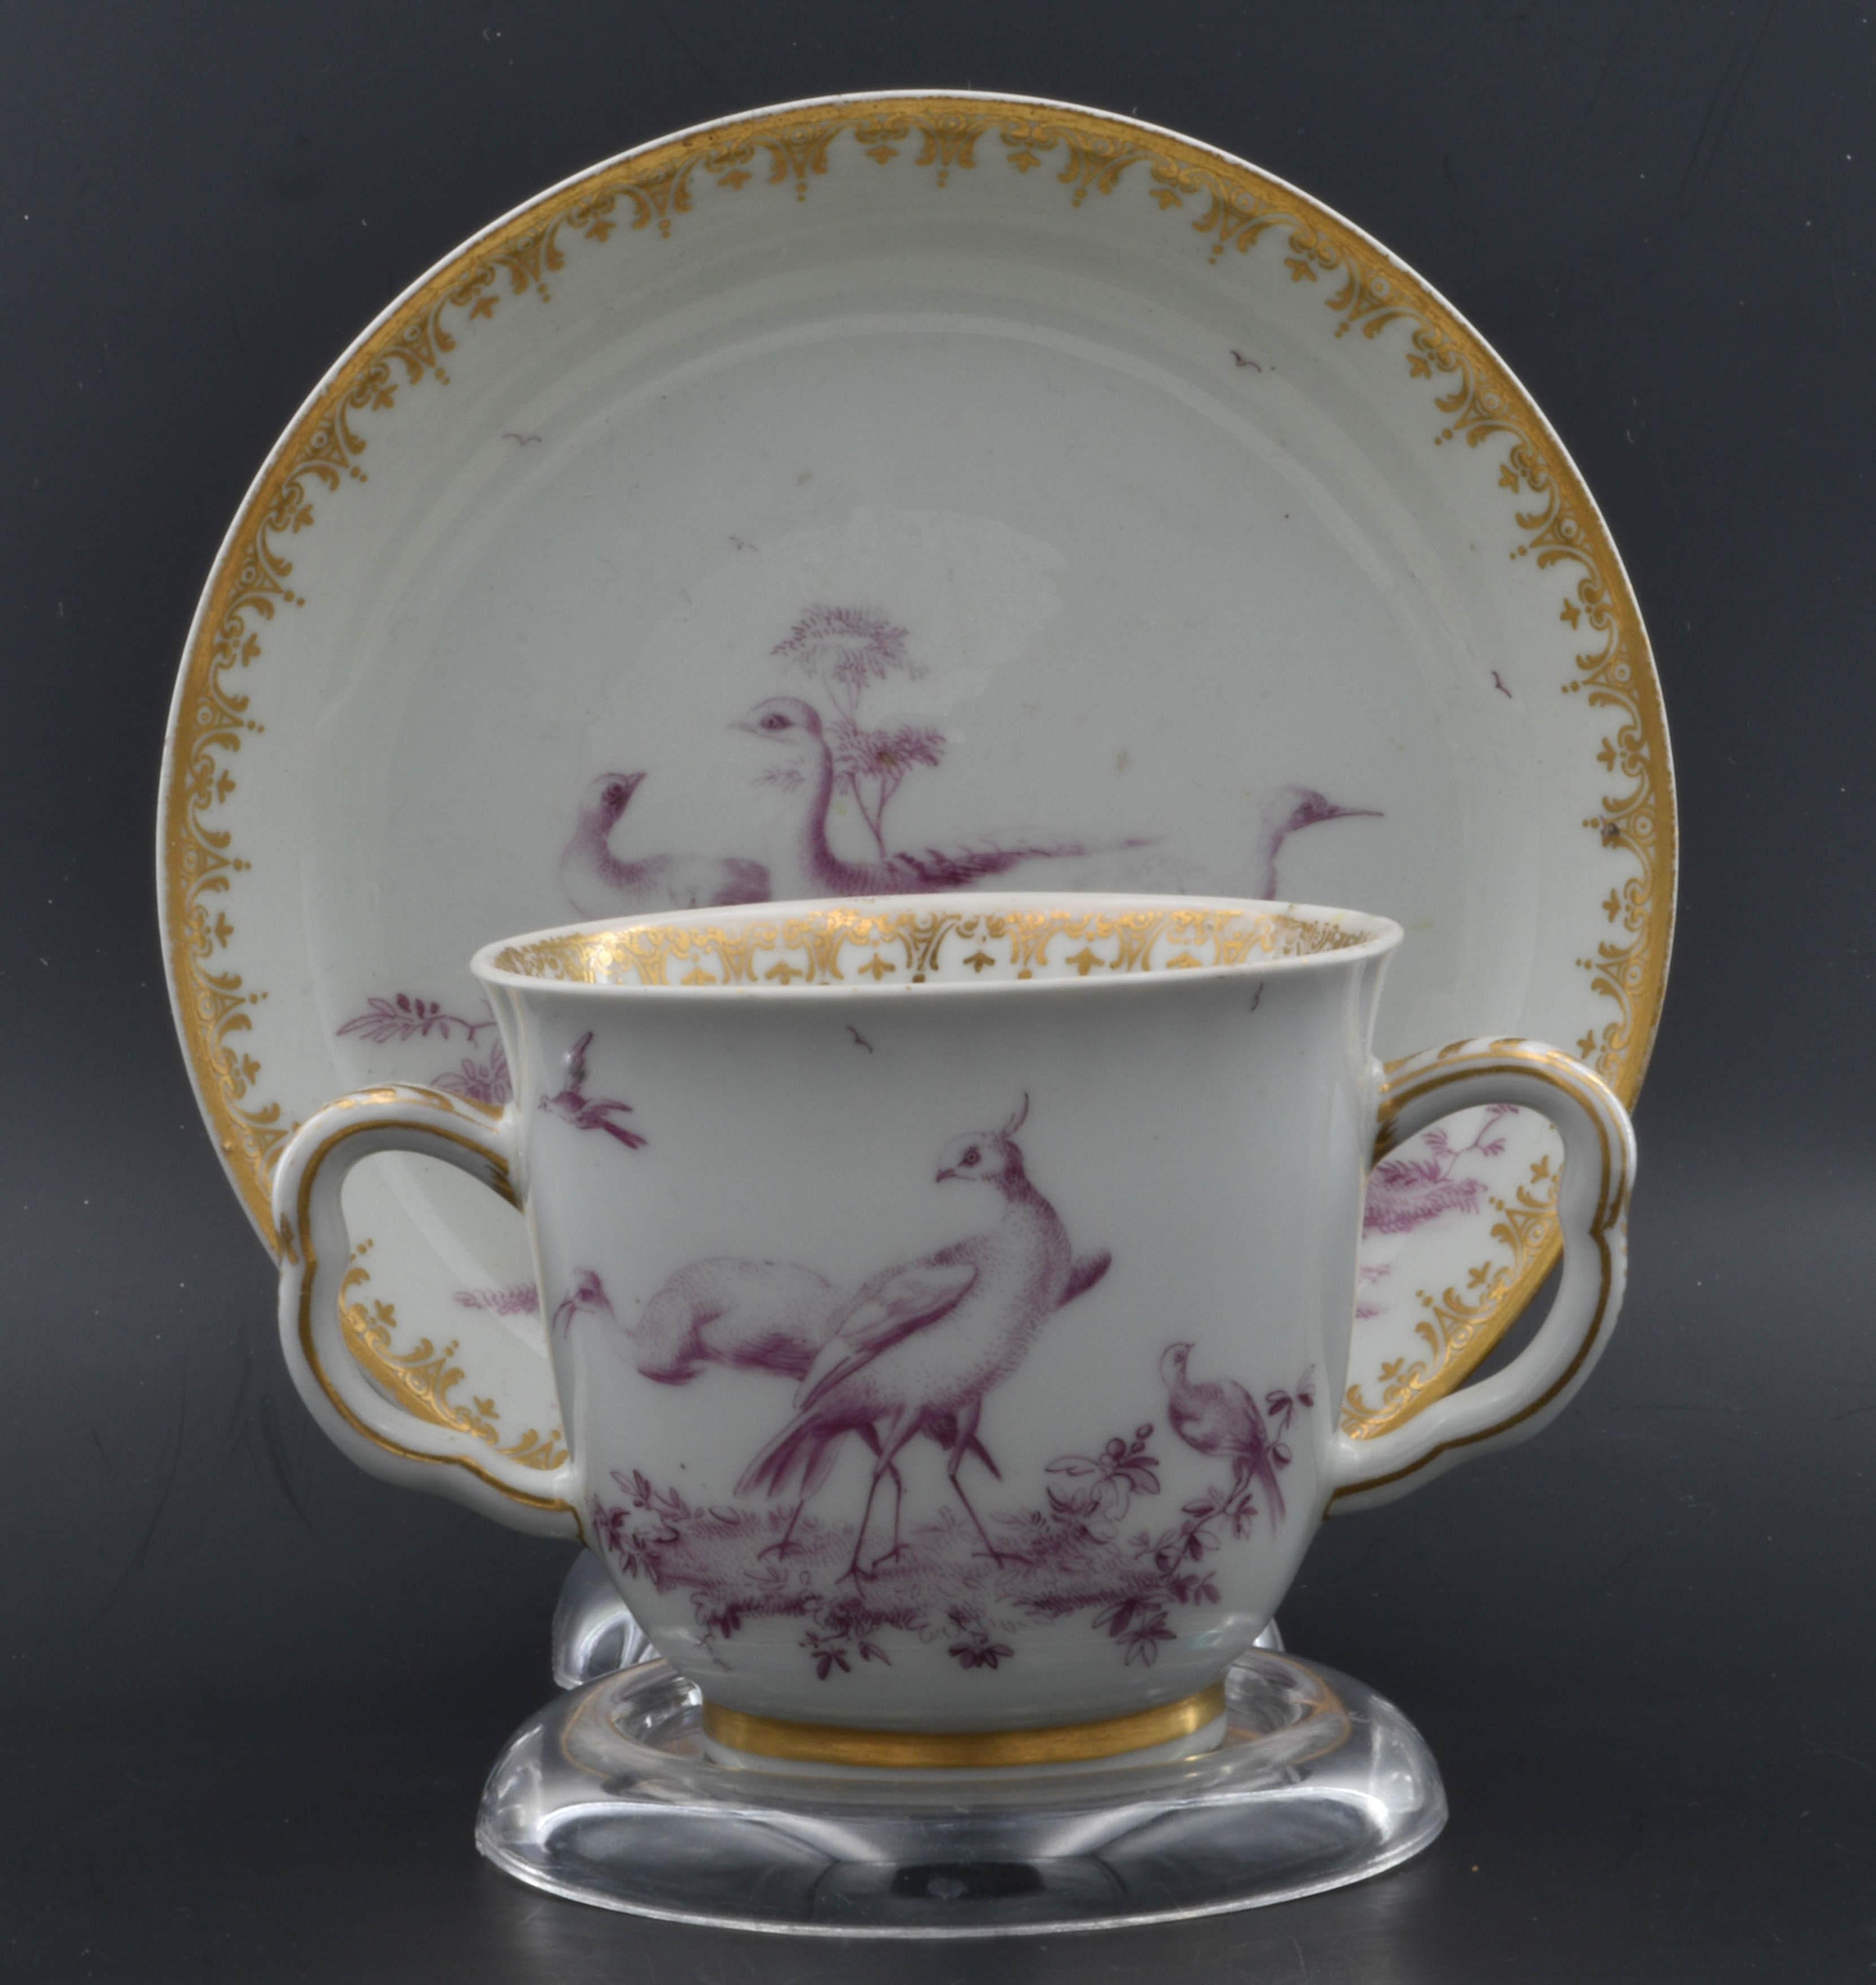 A good chocolate cup, with gilt decoration and finely painted puce birds - so finely painted you might mistake it for a print.